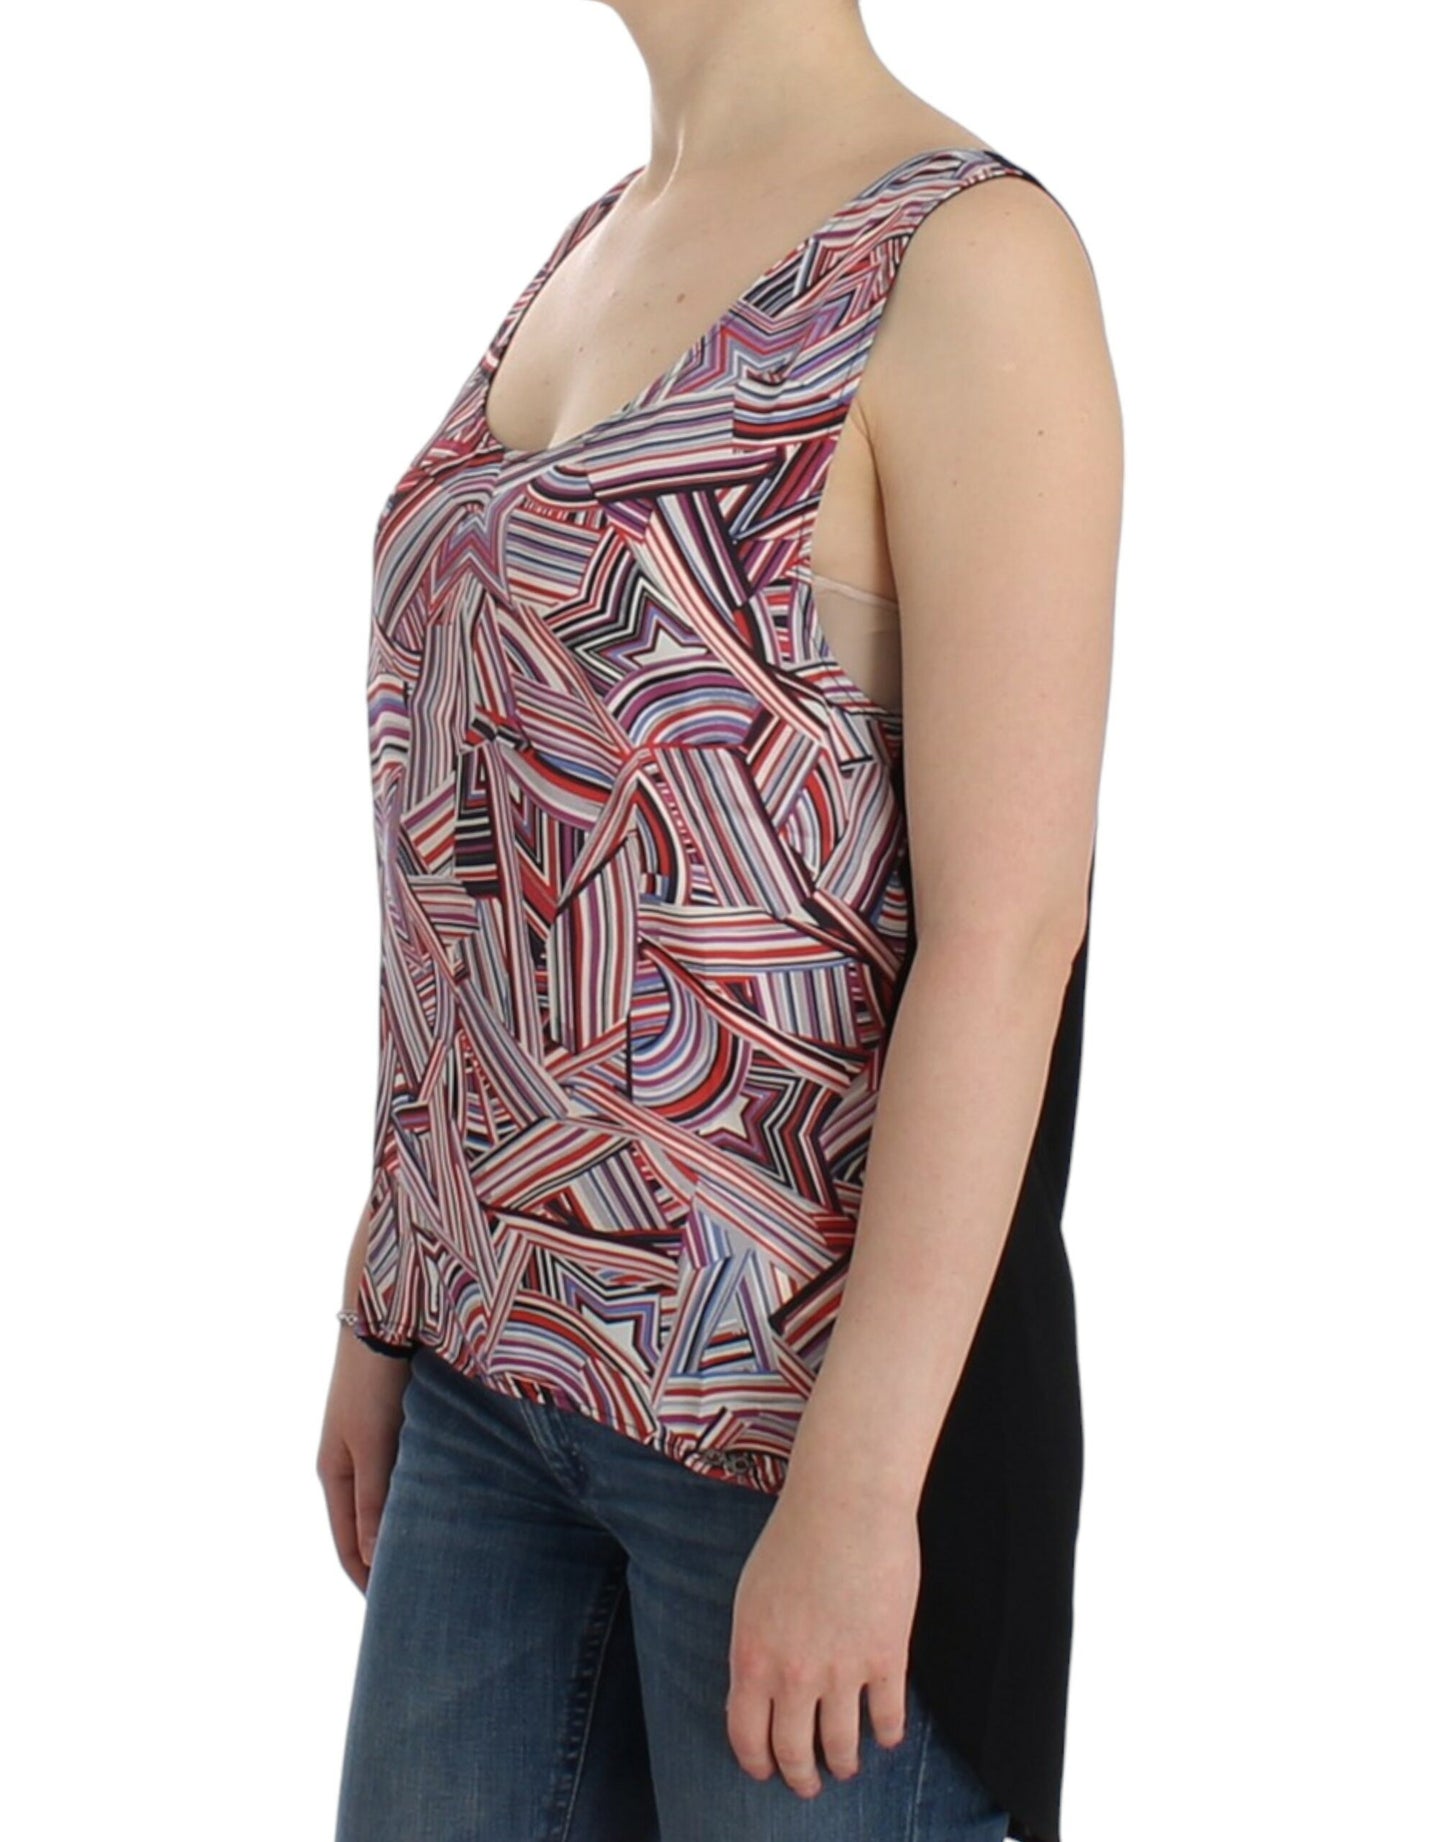 Costume National Chic Multicolor Sleeveless Top